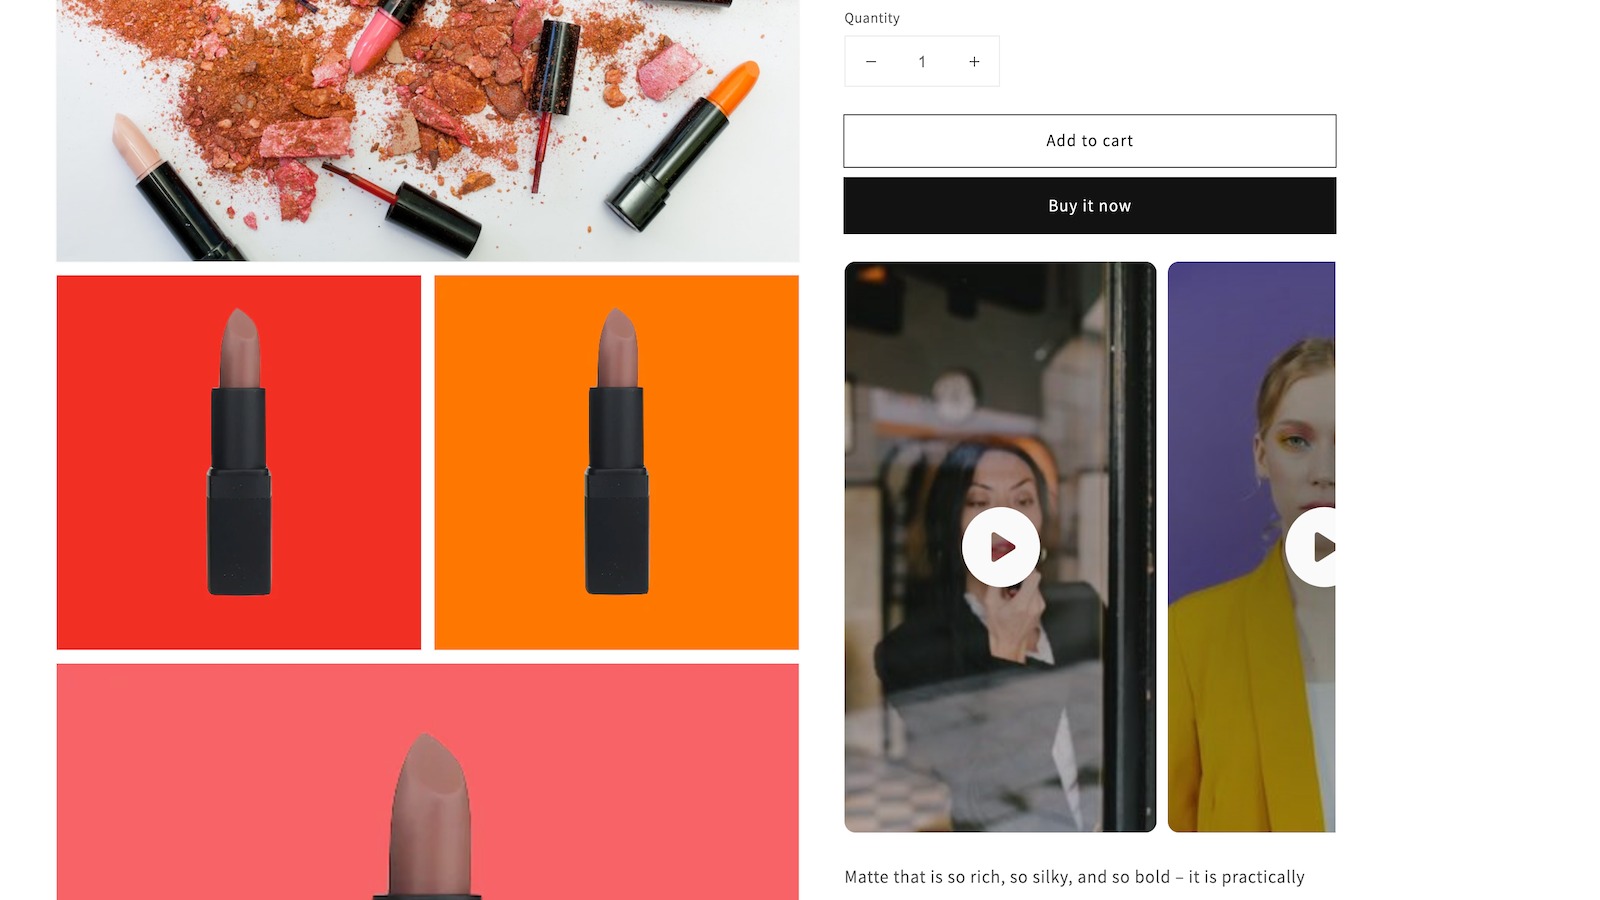 Carousel Shoppable Videos on Product Page